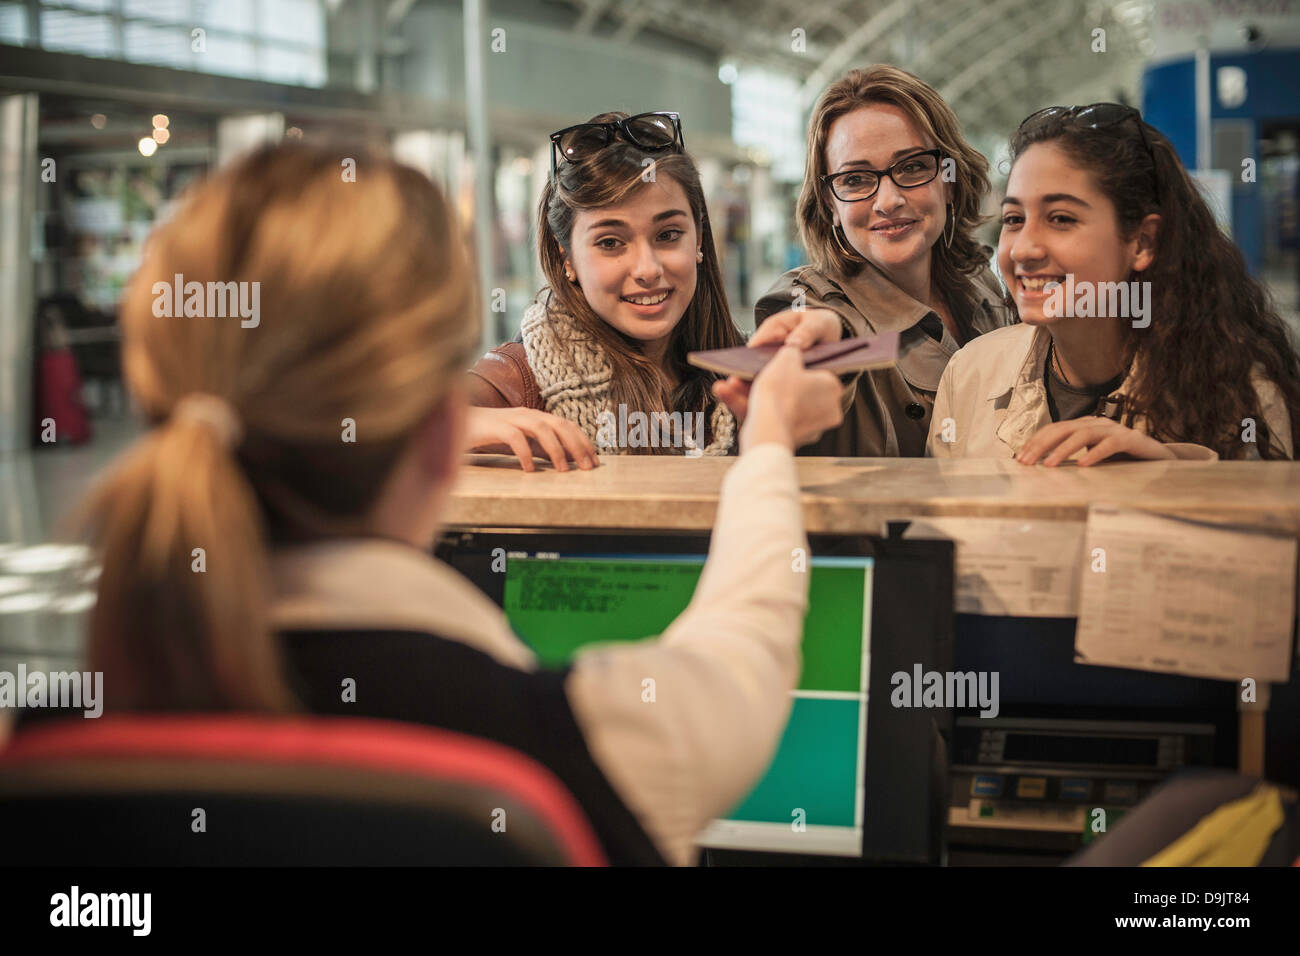 Woman and two teenage girls at airport check in area Stock Photo